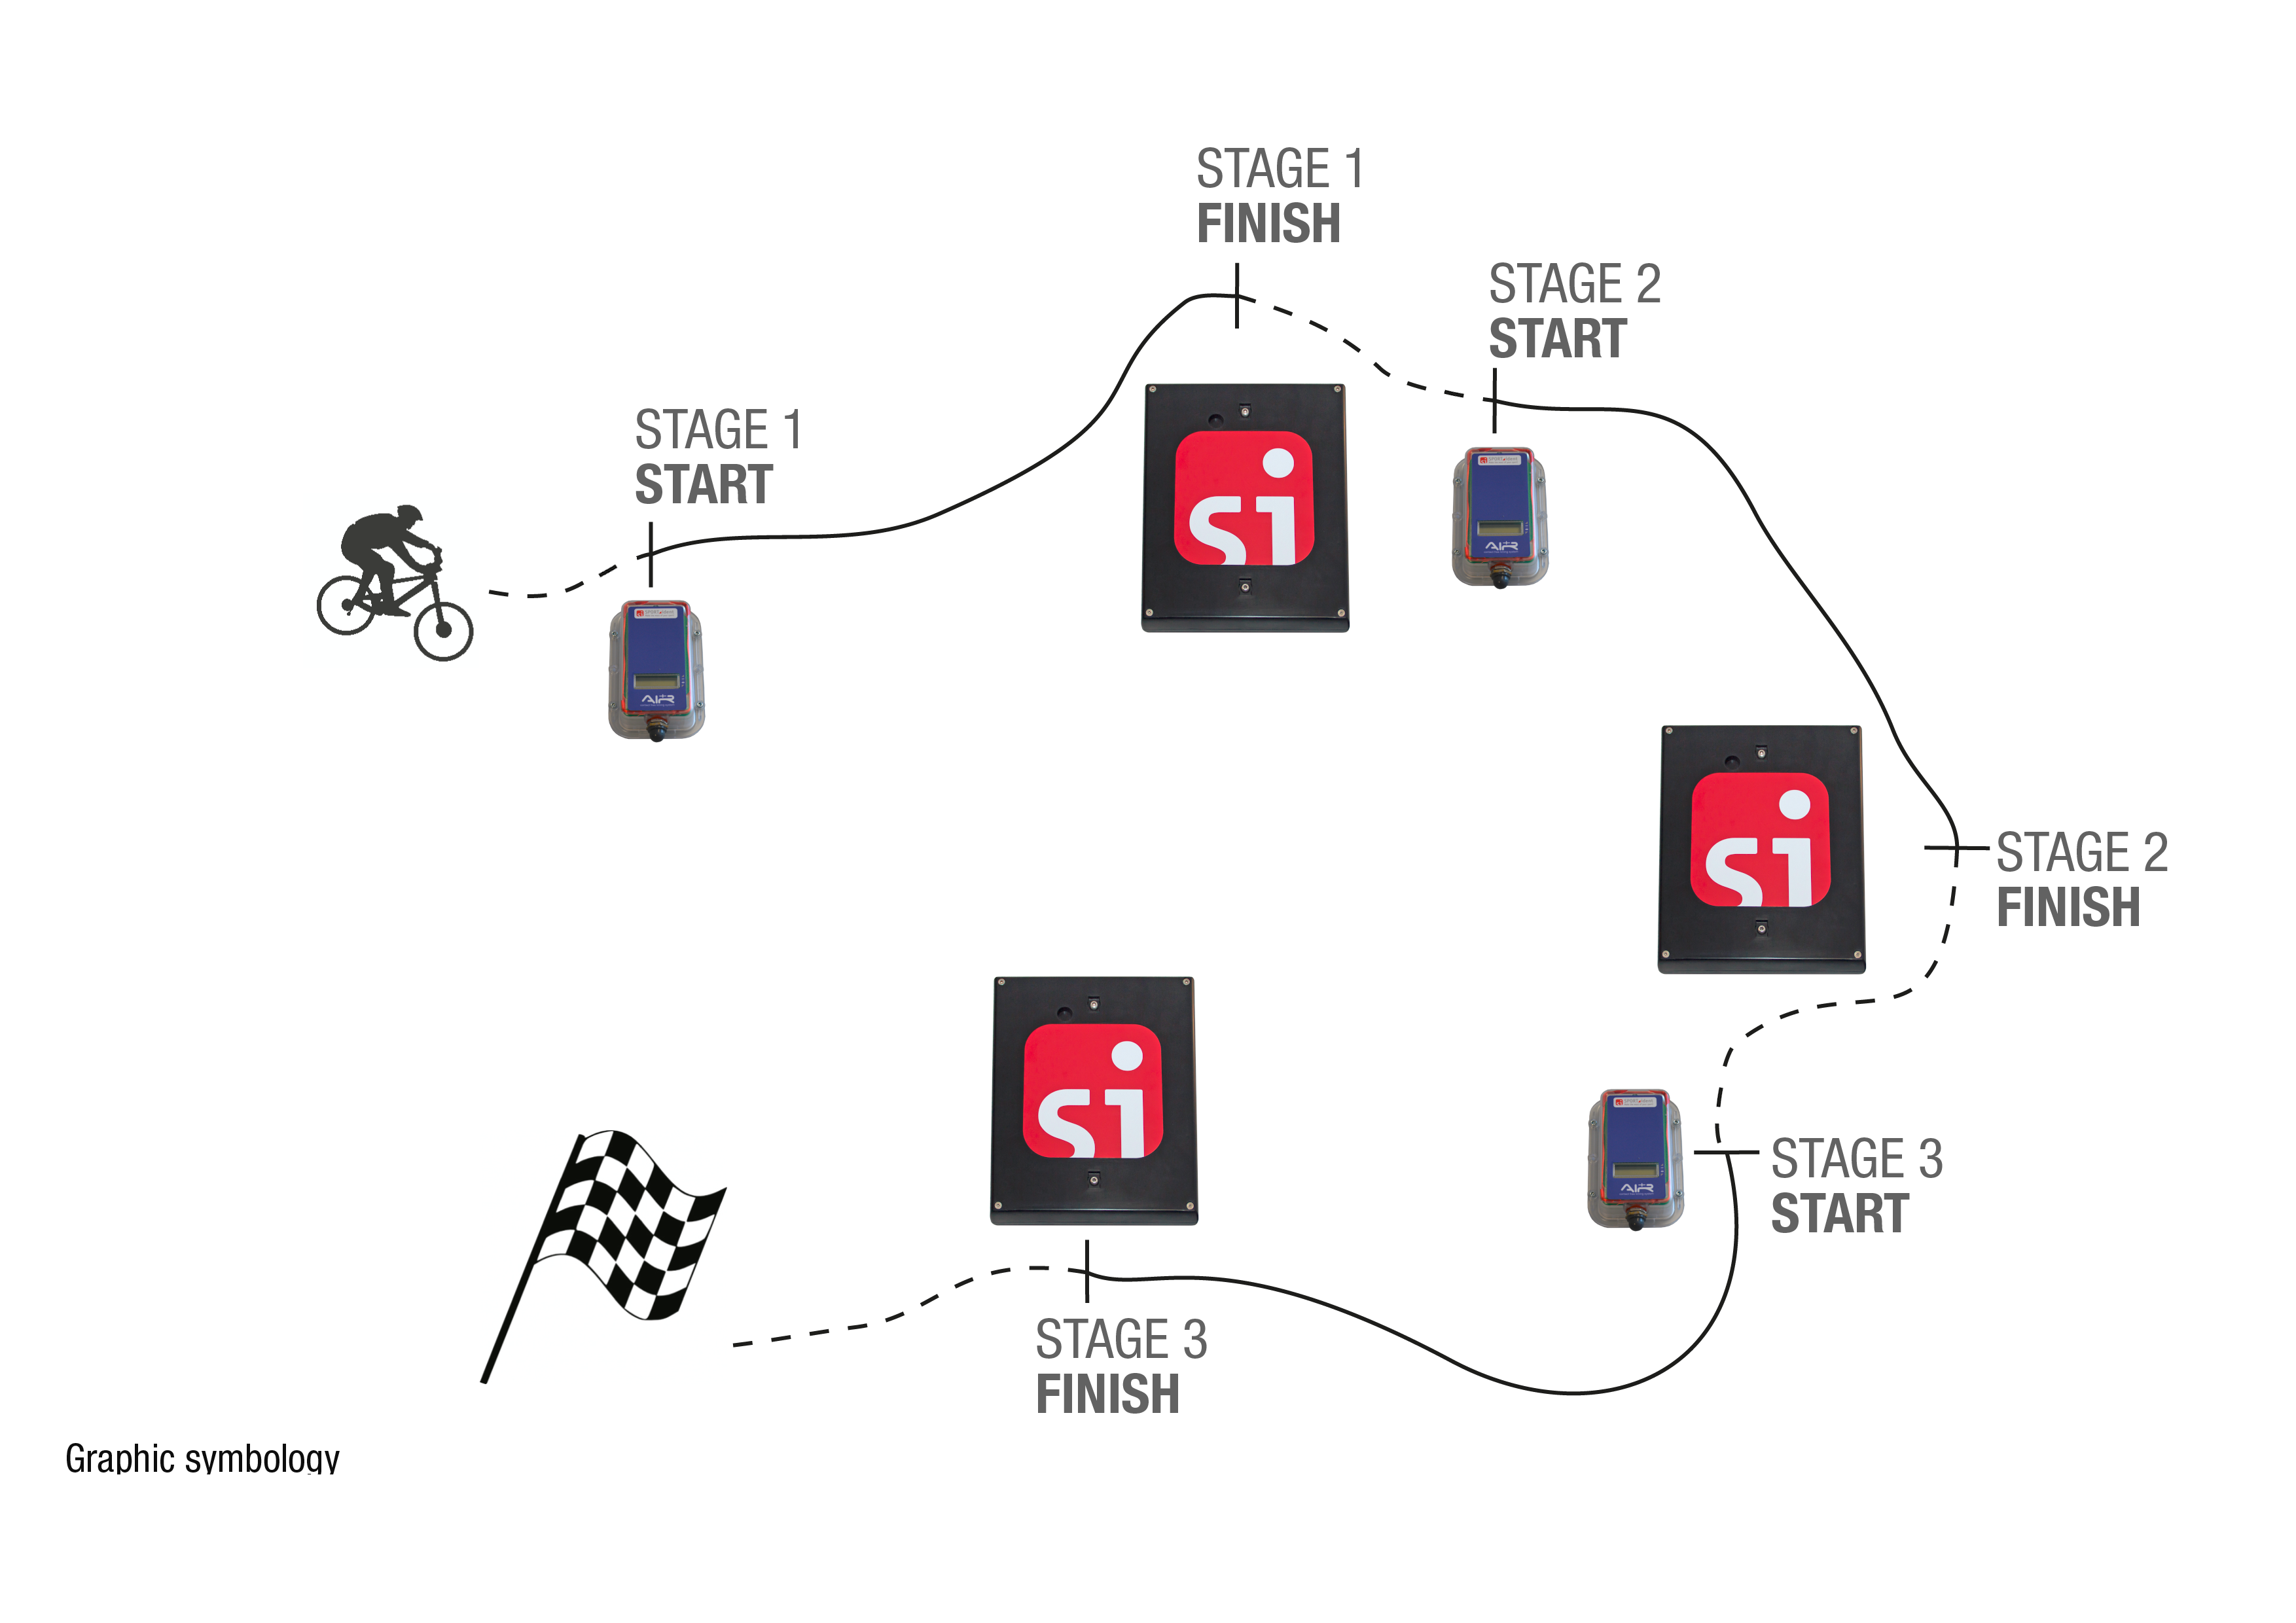 The typical SPORTident timing setup for an MTB Enduro event